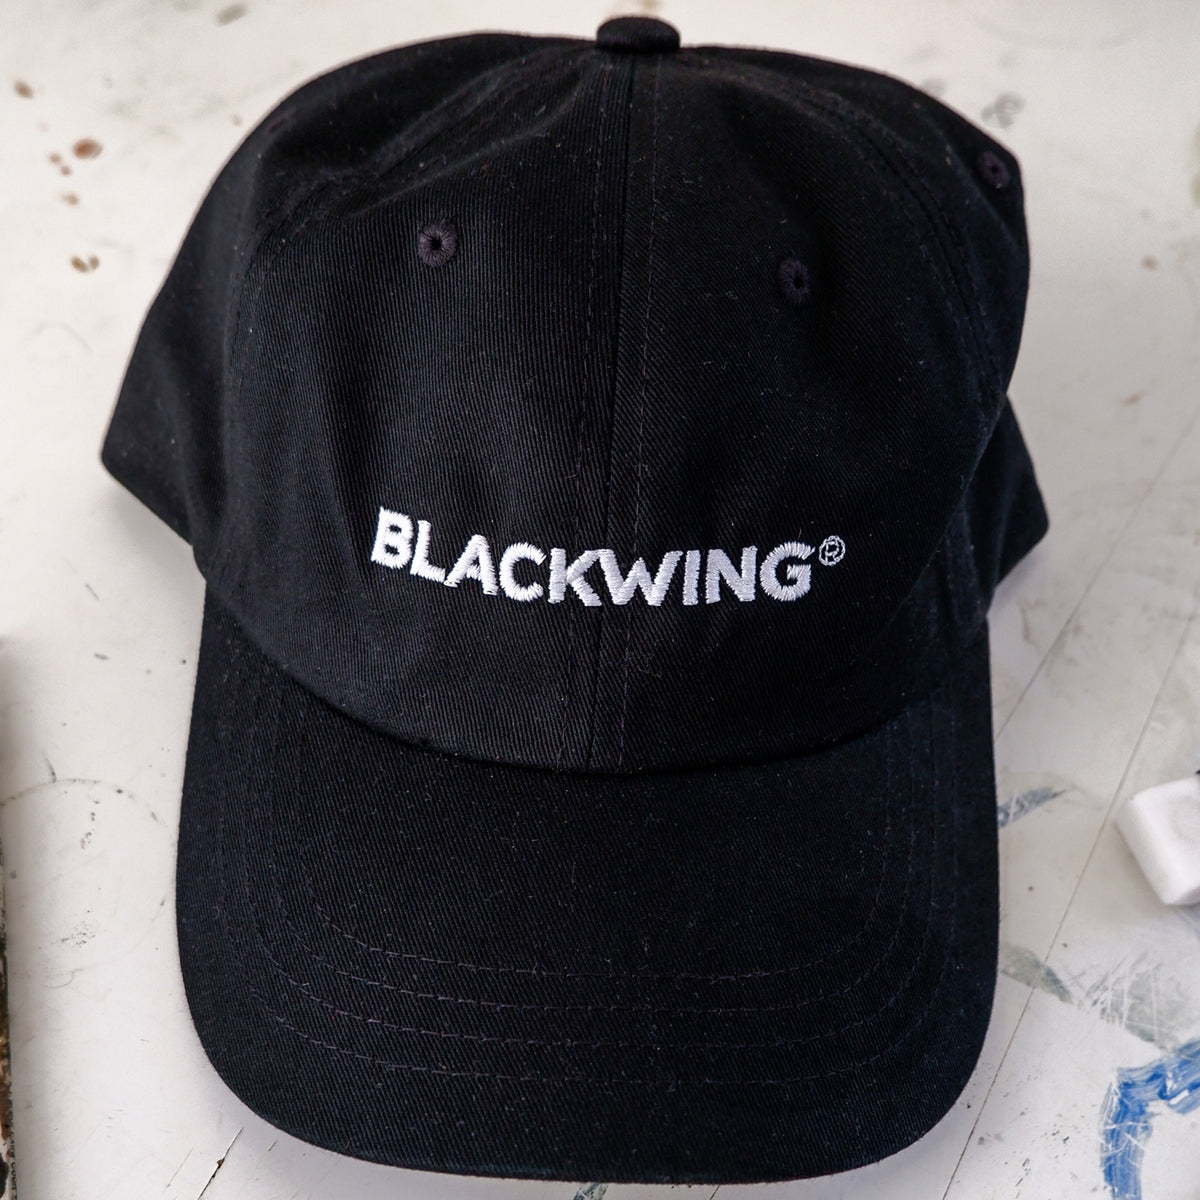 A Blackwing Logo Hat with embroidered white text.